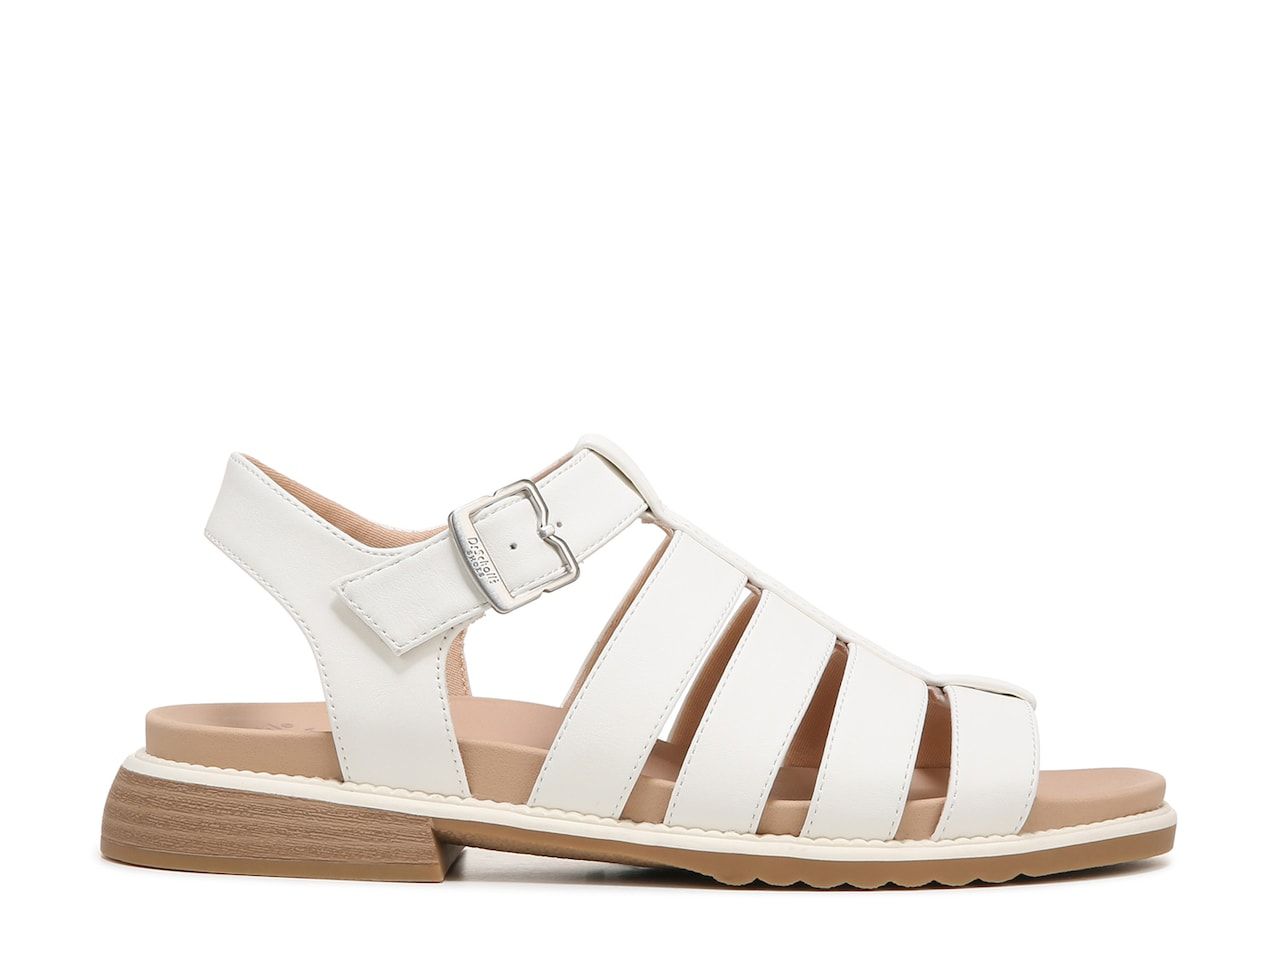 Fisherman Sandals Are One of 2023's Biggest Sandal Trends | Who What Wear